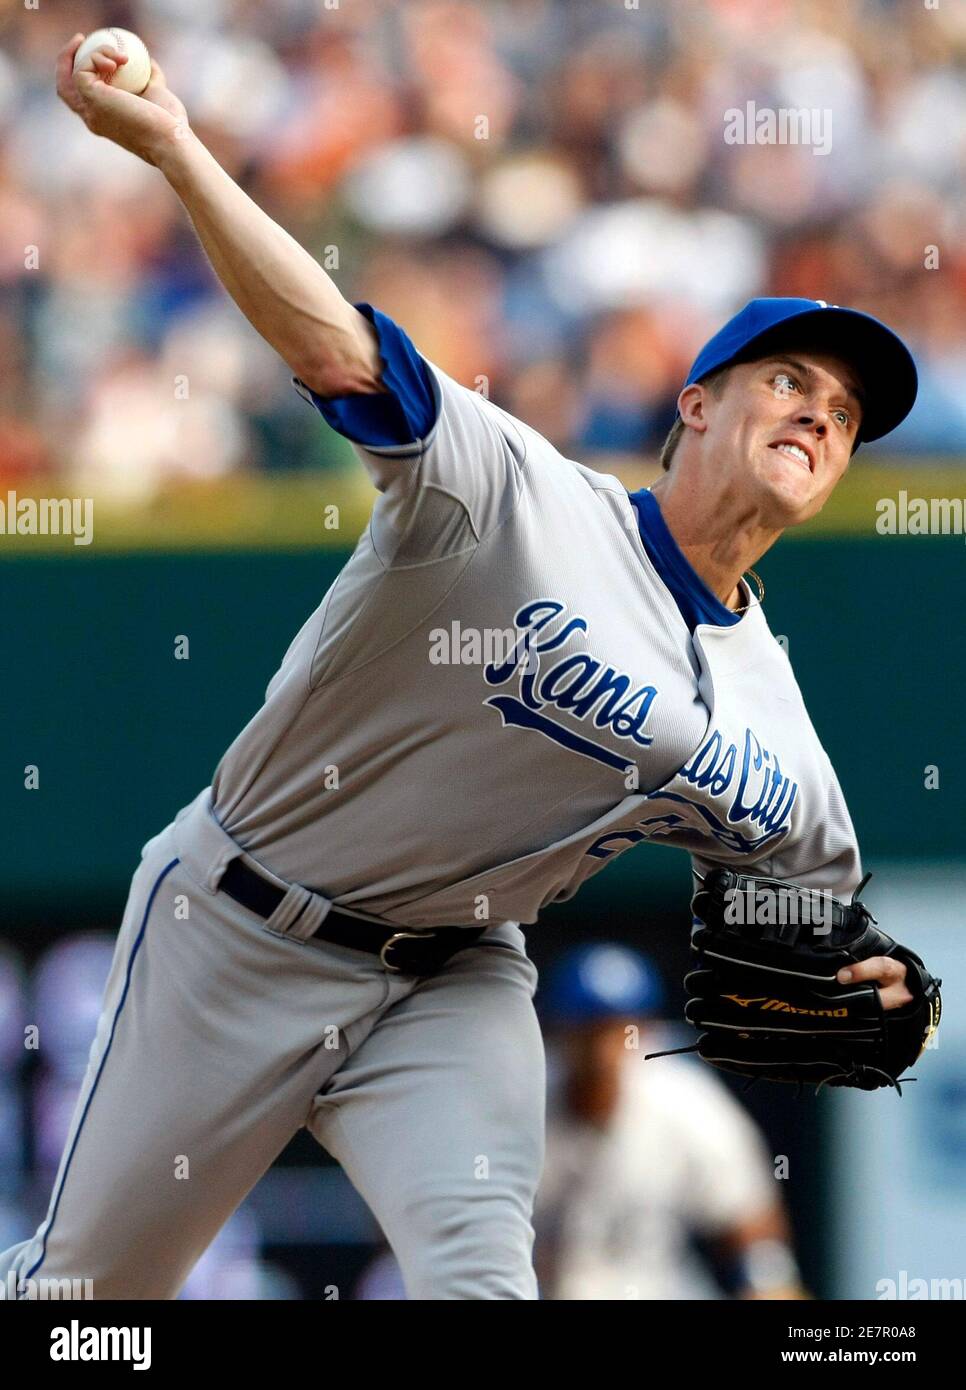 Kansas City Royals starting pitcher Zack Greinke throws to the Detroit Tigers during the first inning of their MLB American League baseball game in Detroit, Michigan in this July 8, 2009 file photo. Greinke received 25 out of 28 votes to become the MLB 2009 American League Cy Young winner.    REUTERS/Rebecca Cook/Files   (UNITED STATES SPORT BASEBALL) Stock Photo